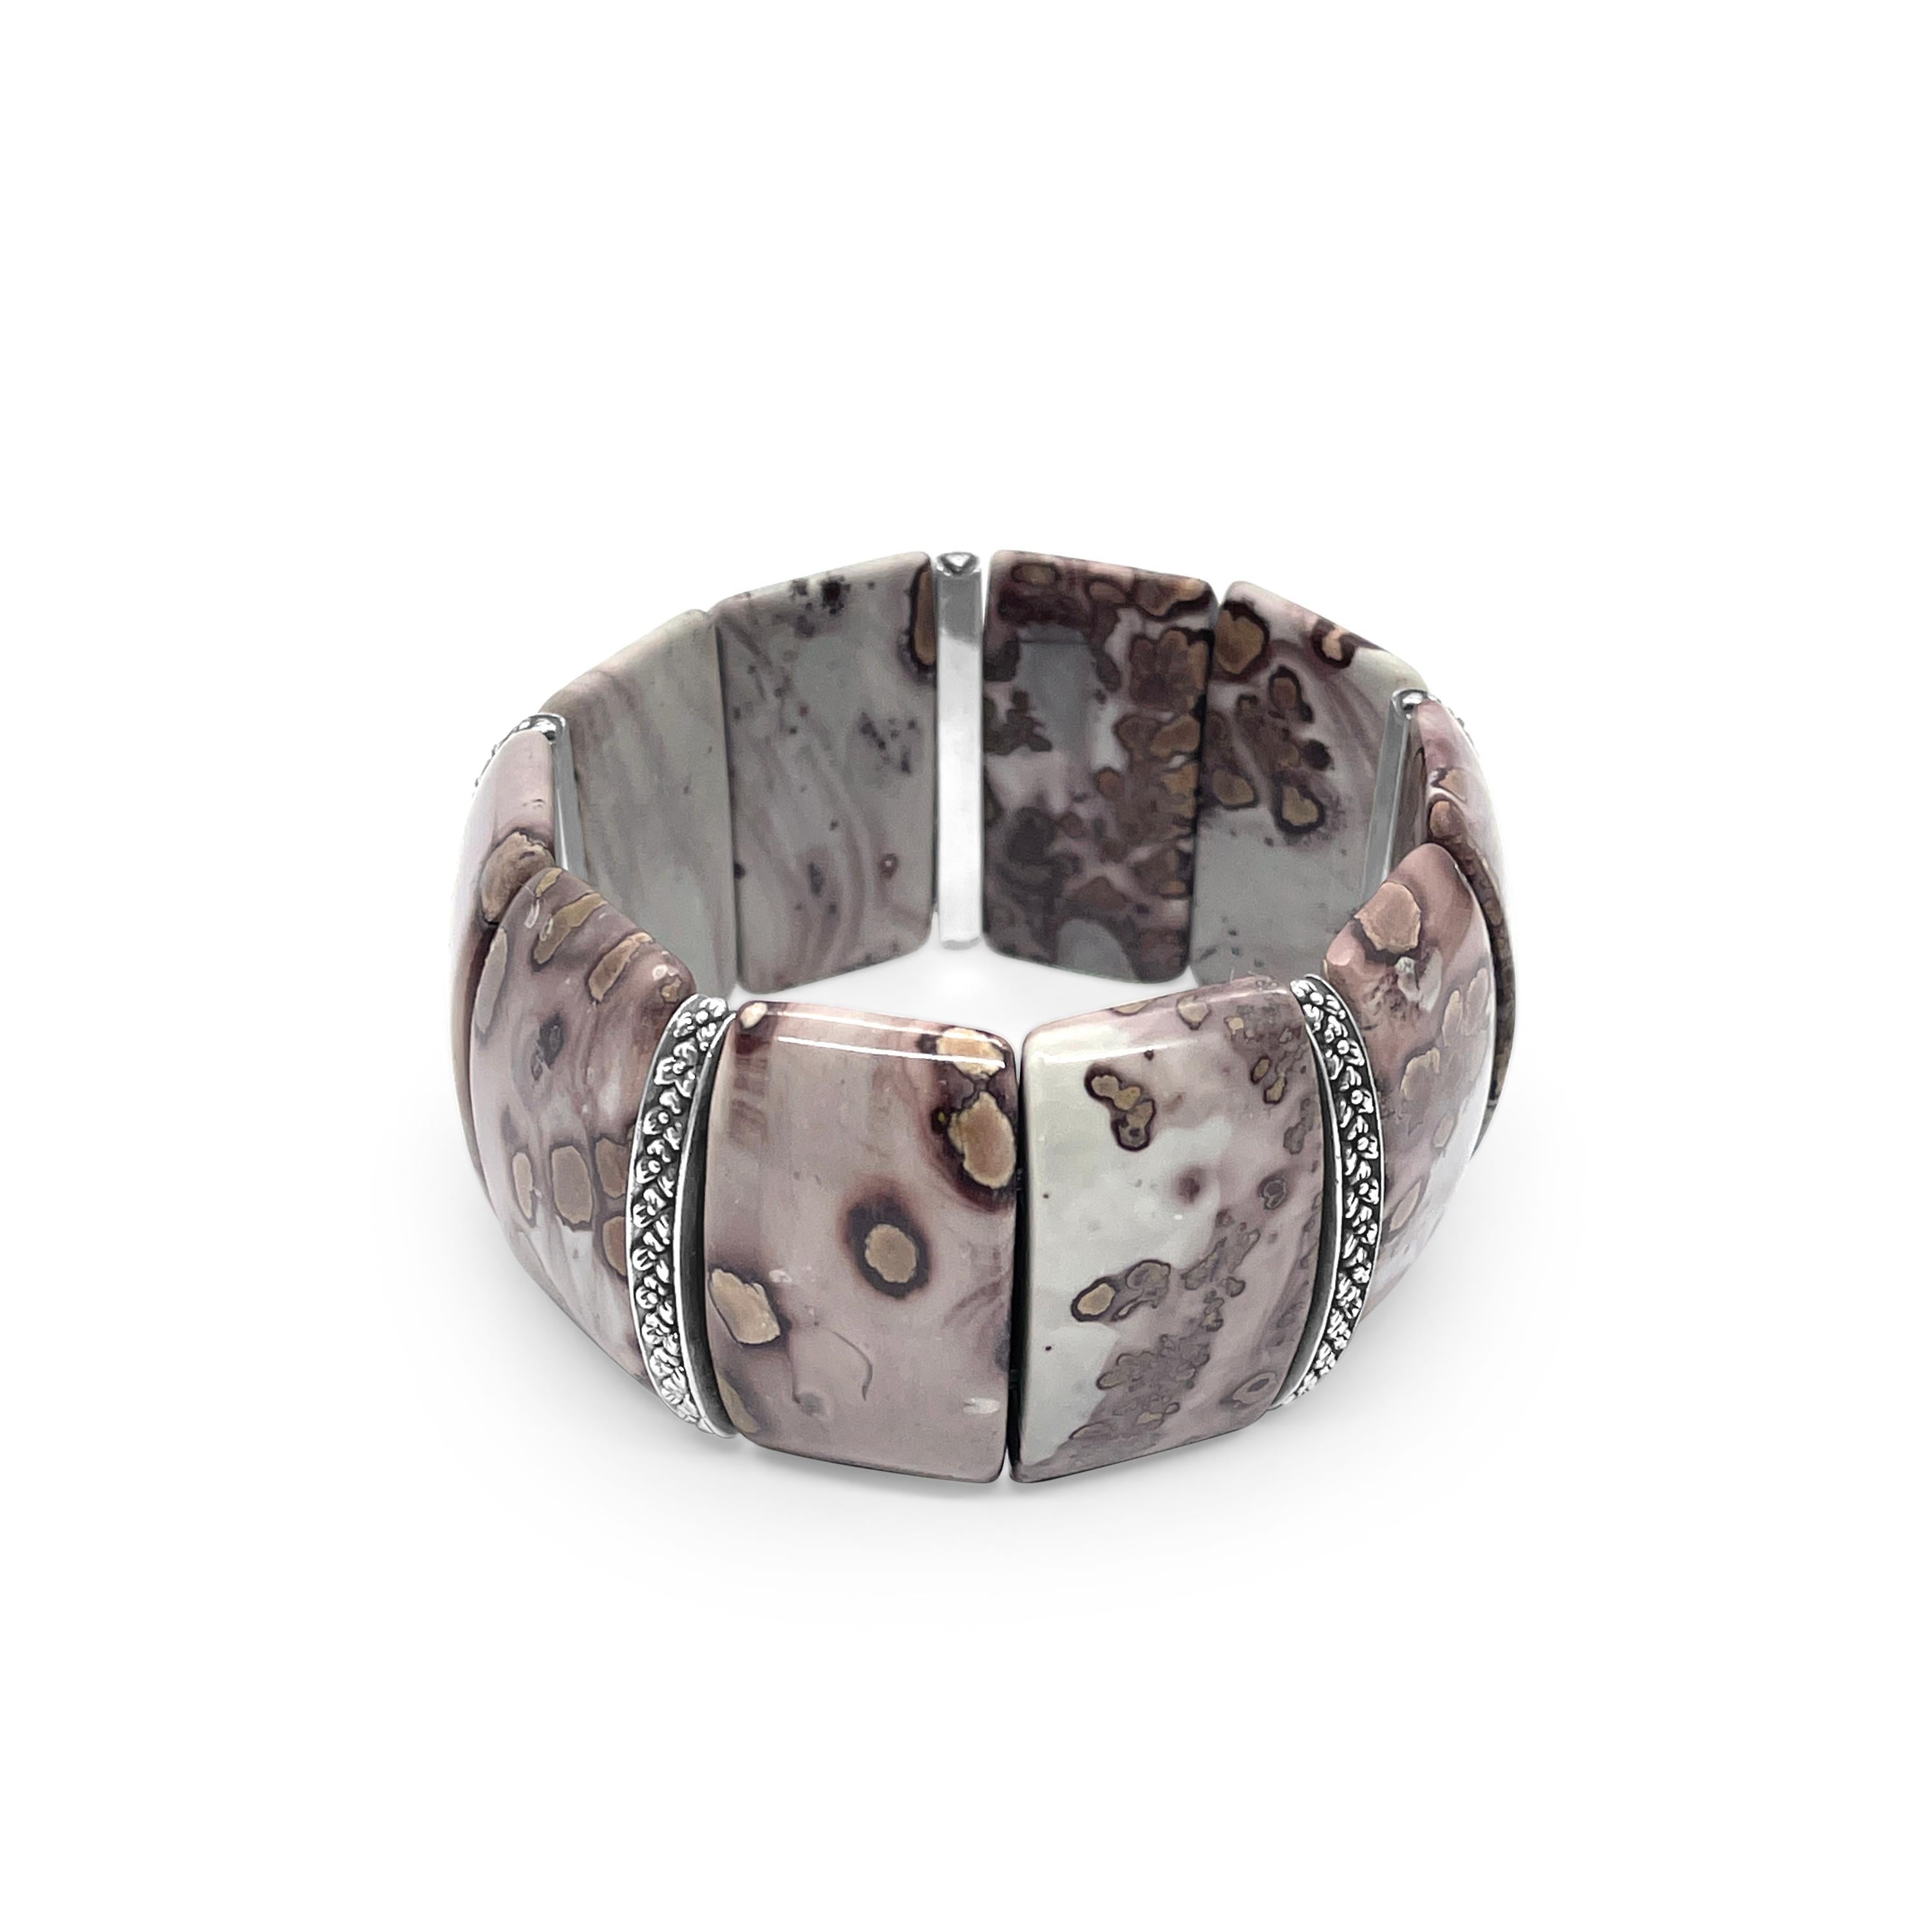 Women's Royal Dendritic Jasper Stretch Bracelet with Engraved Sterling Silver Spacers